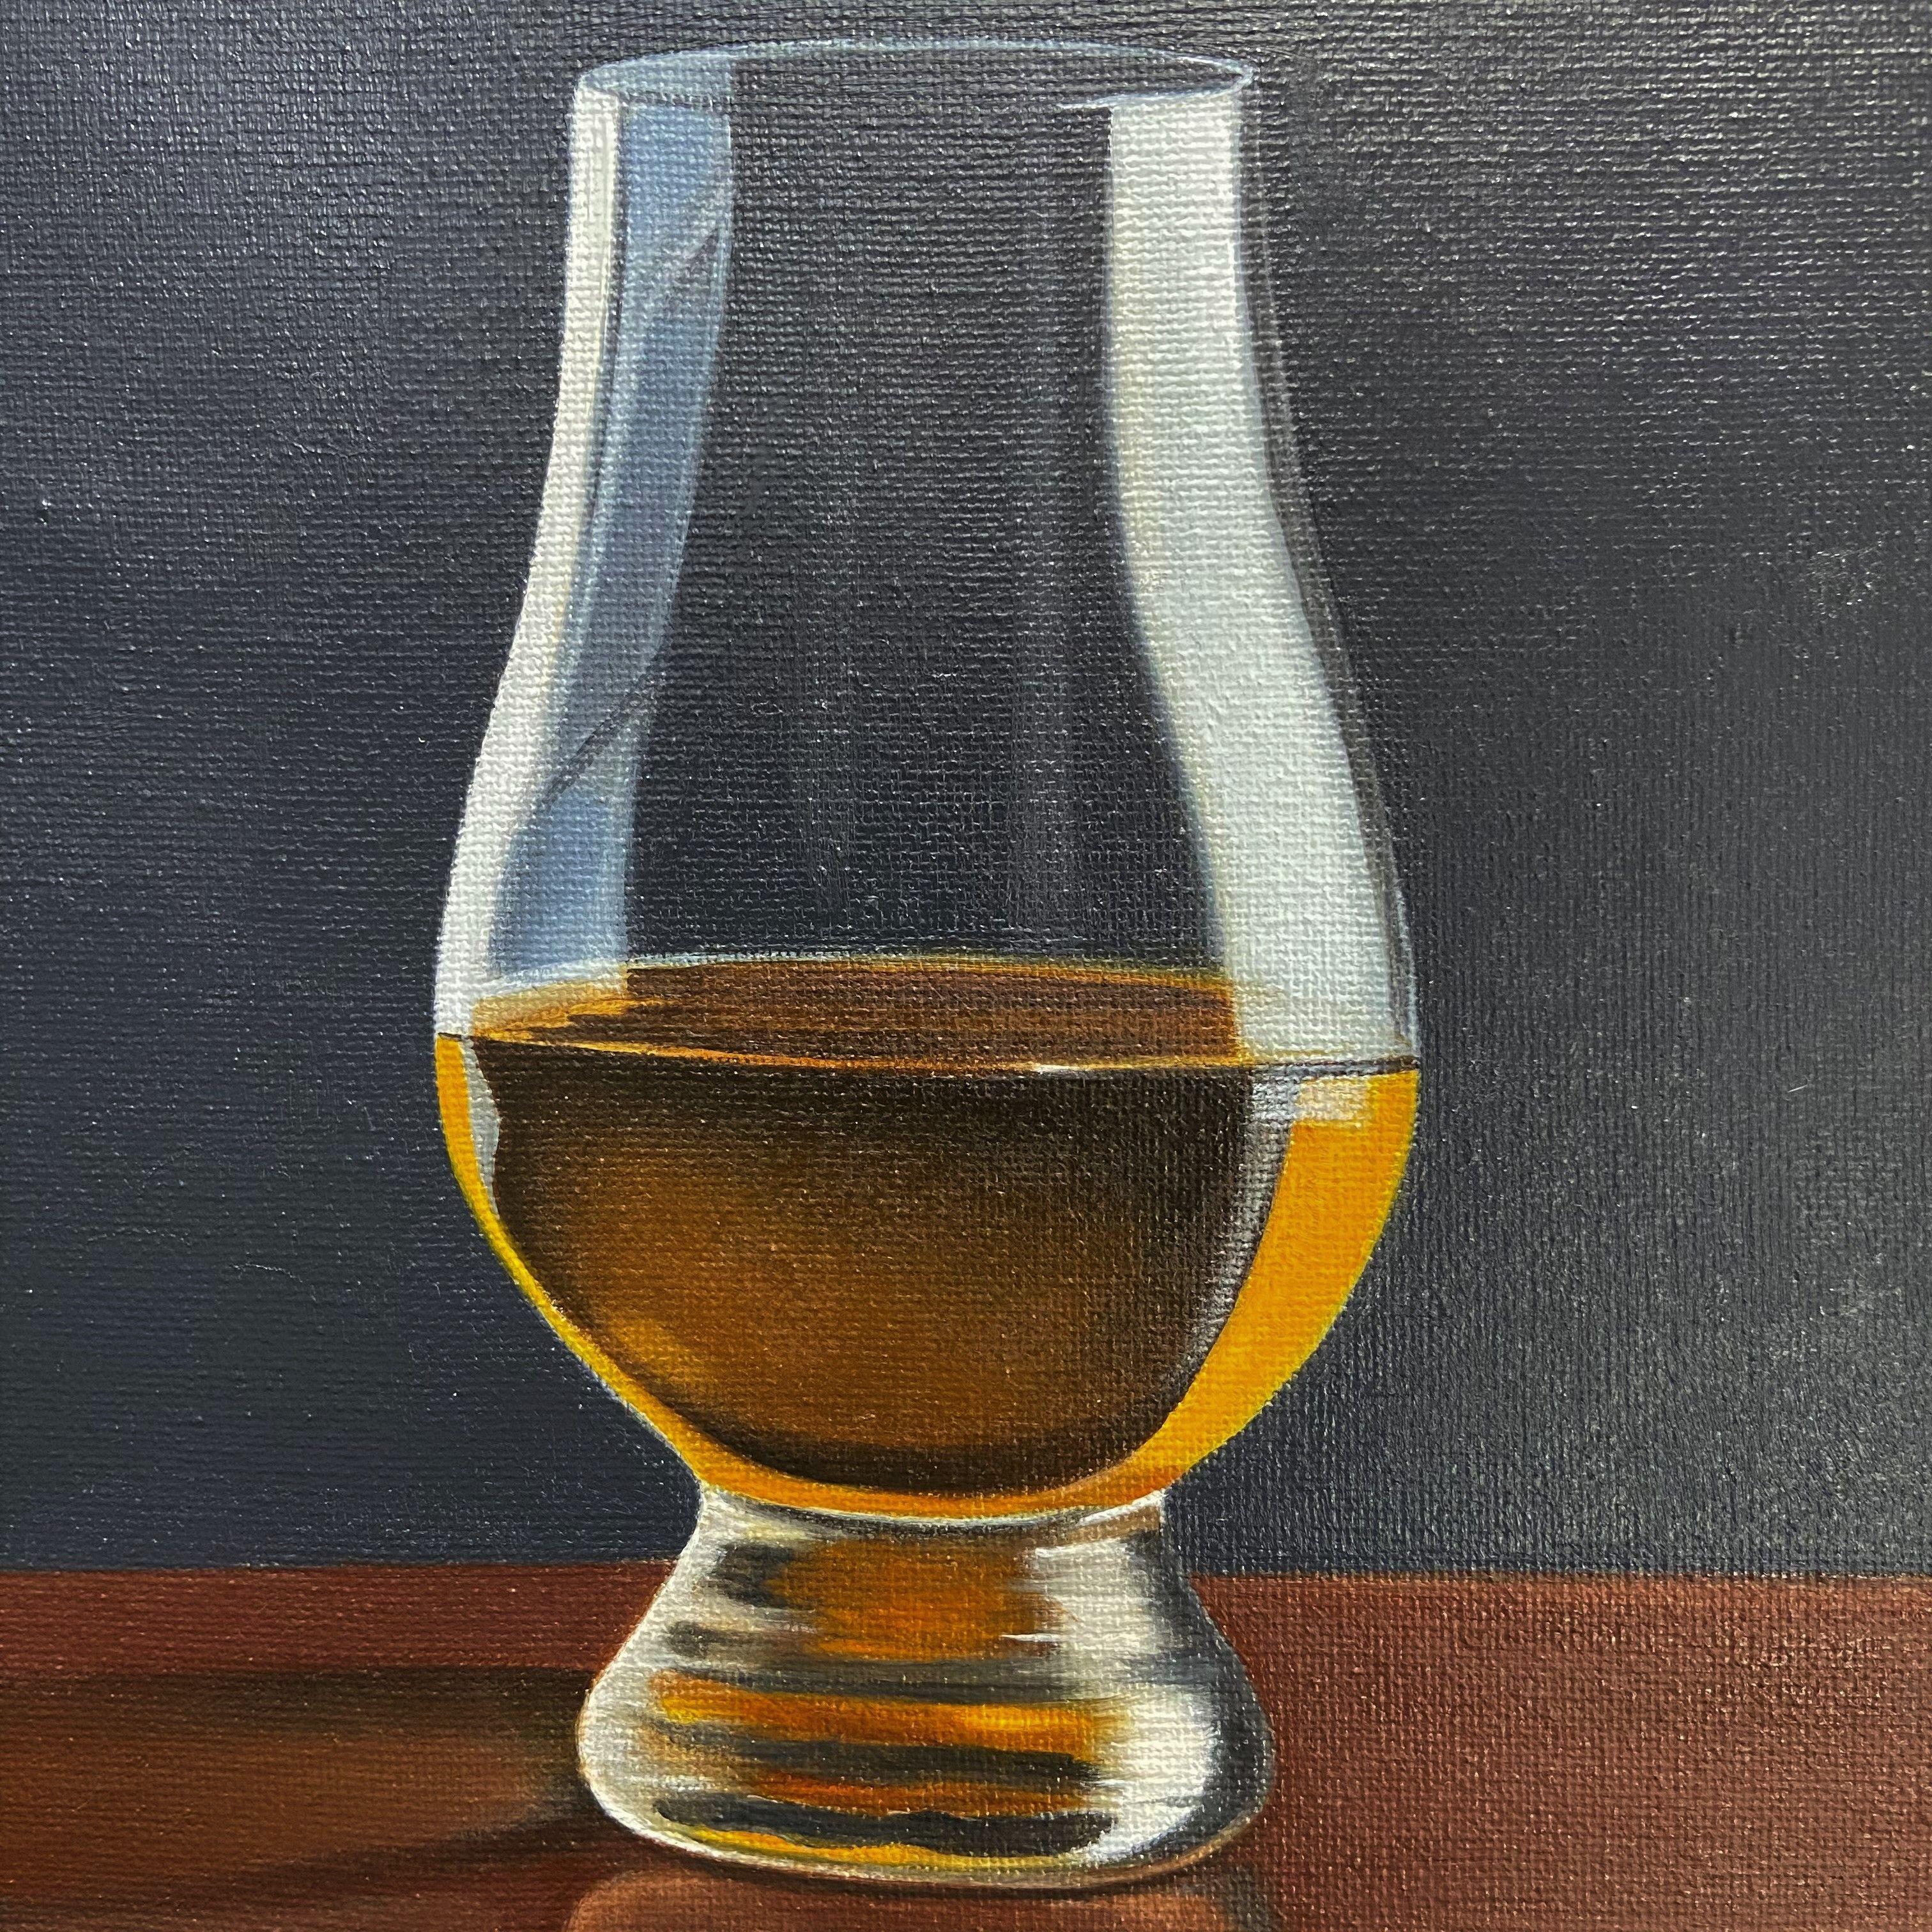 What is a whiskey tasting glass called?